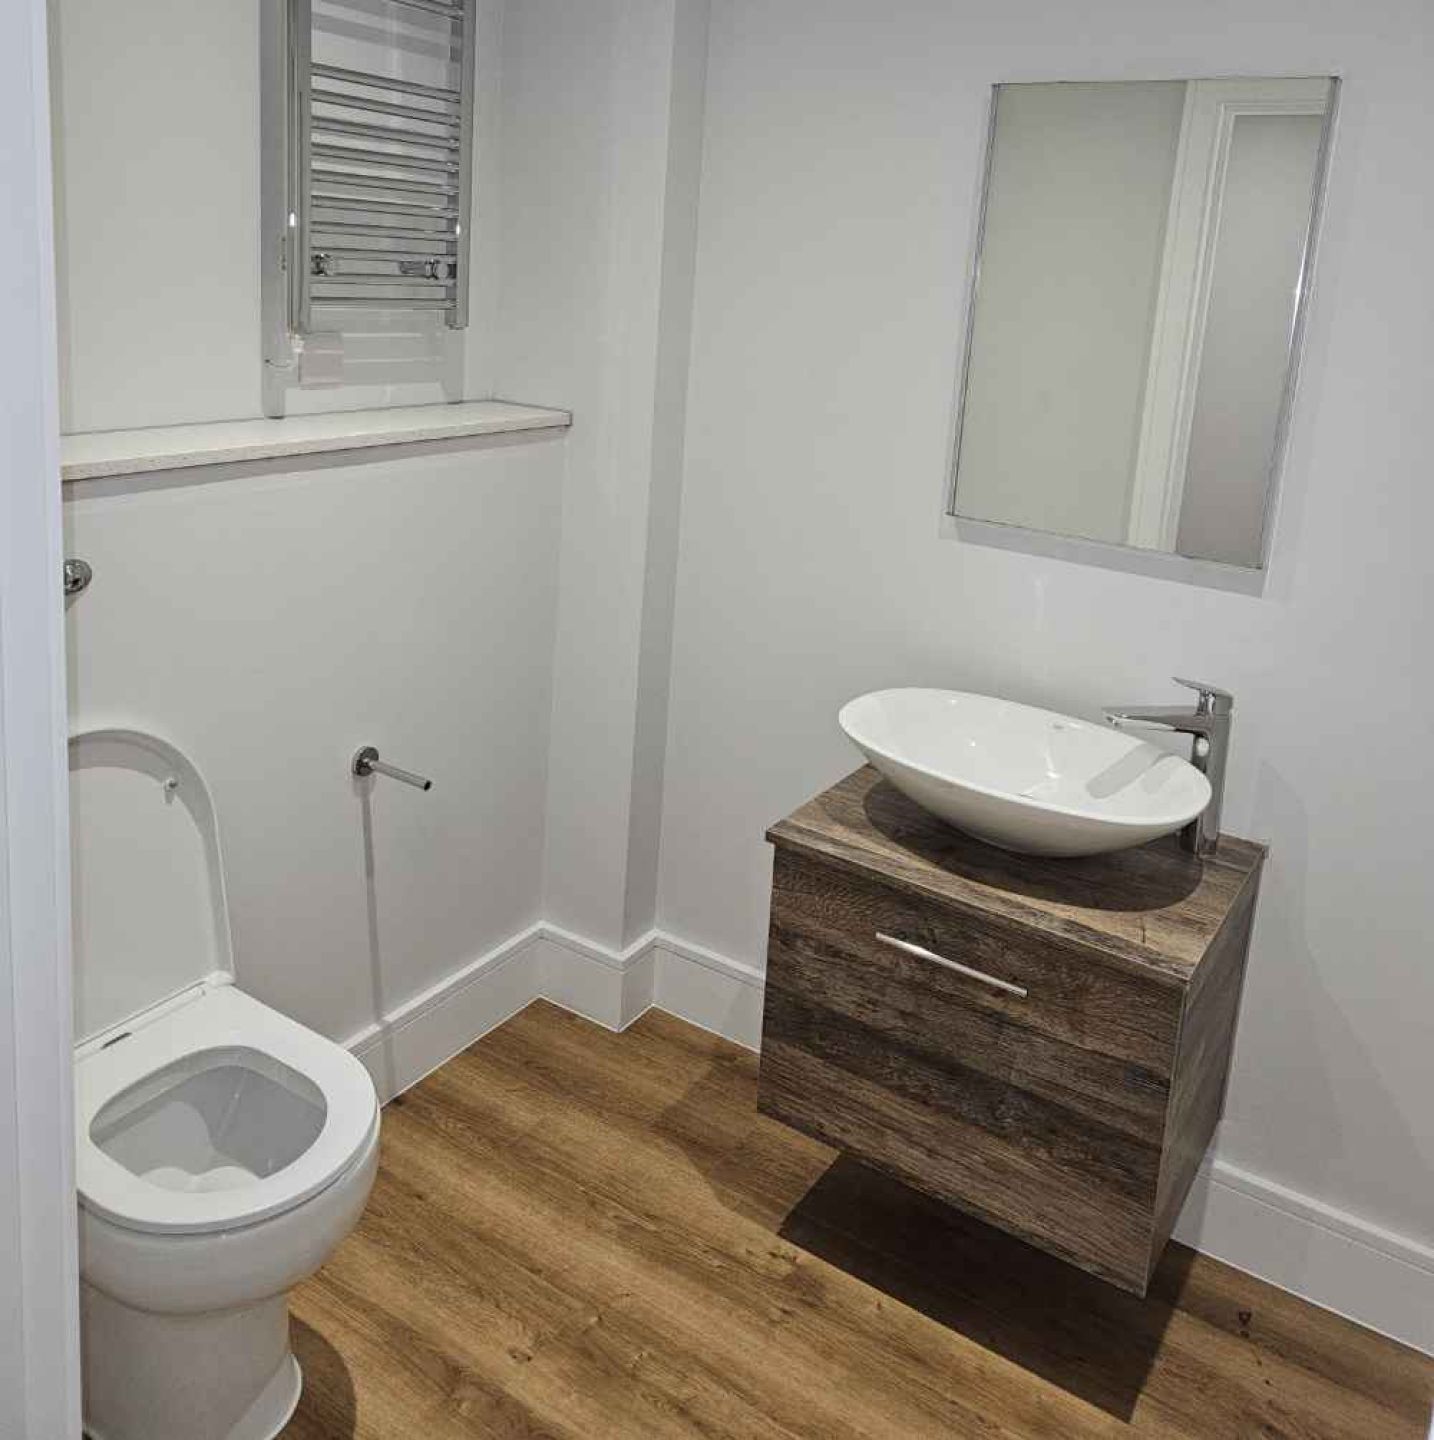 Completed toilet with basin area with wooden storage underneath.